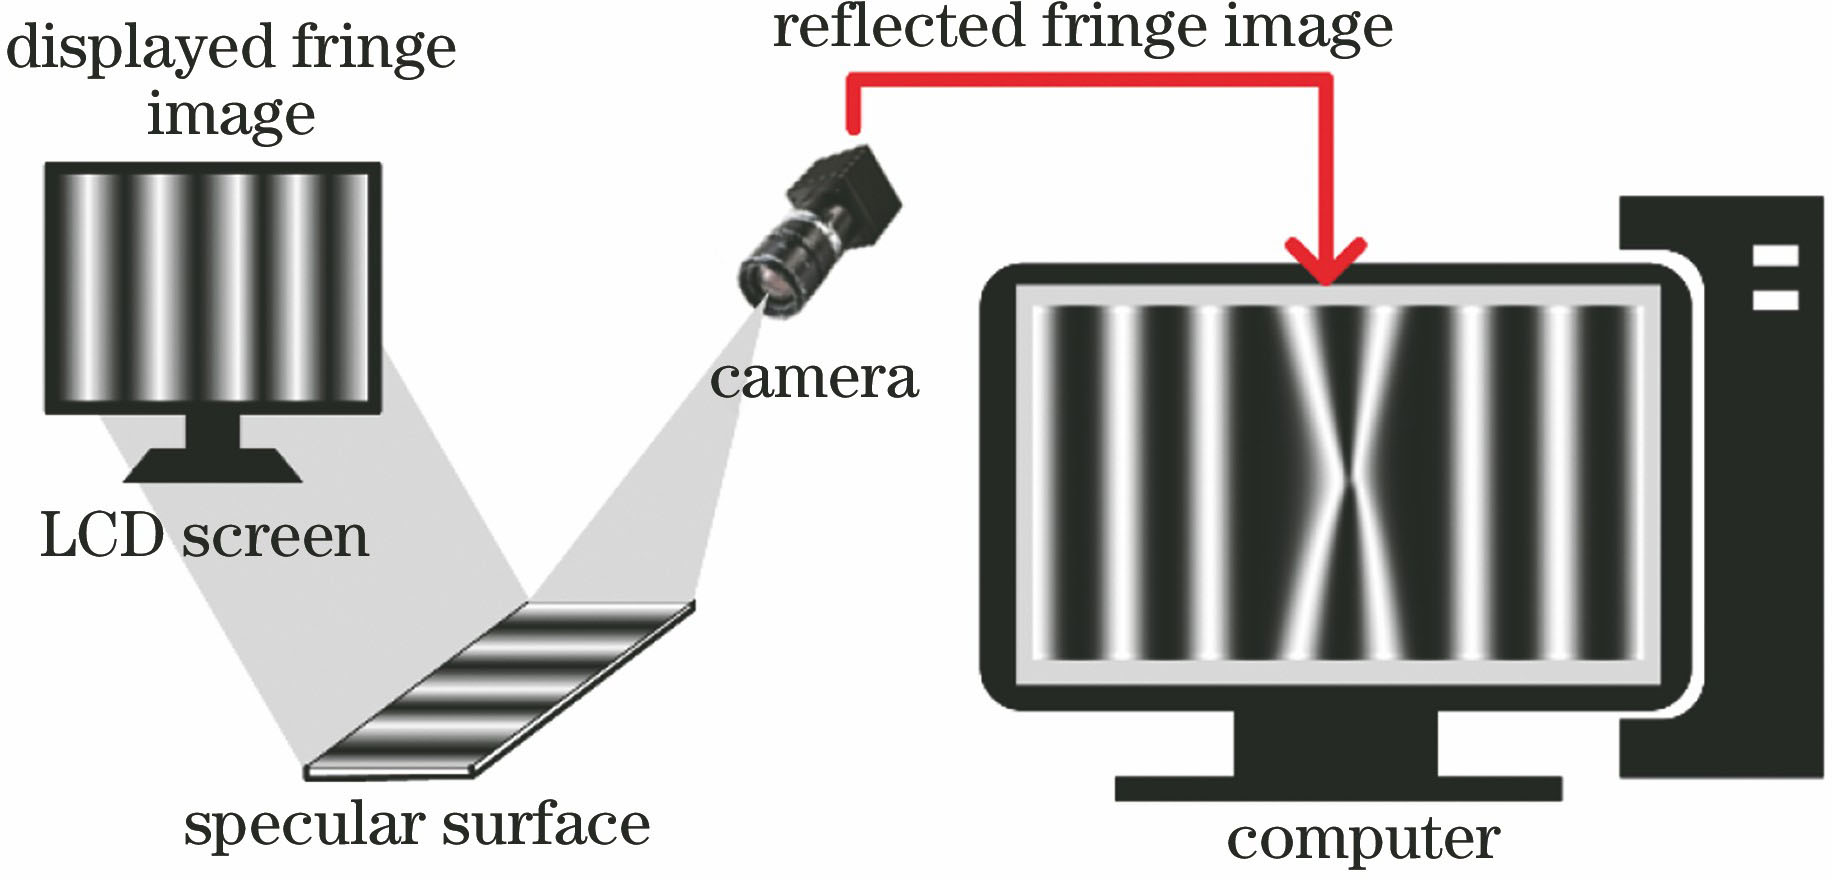 Mirror surface defect detection system based on PMD